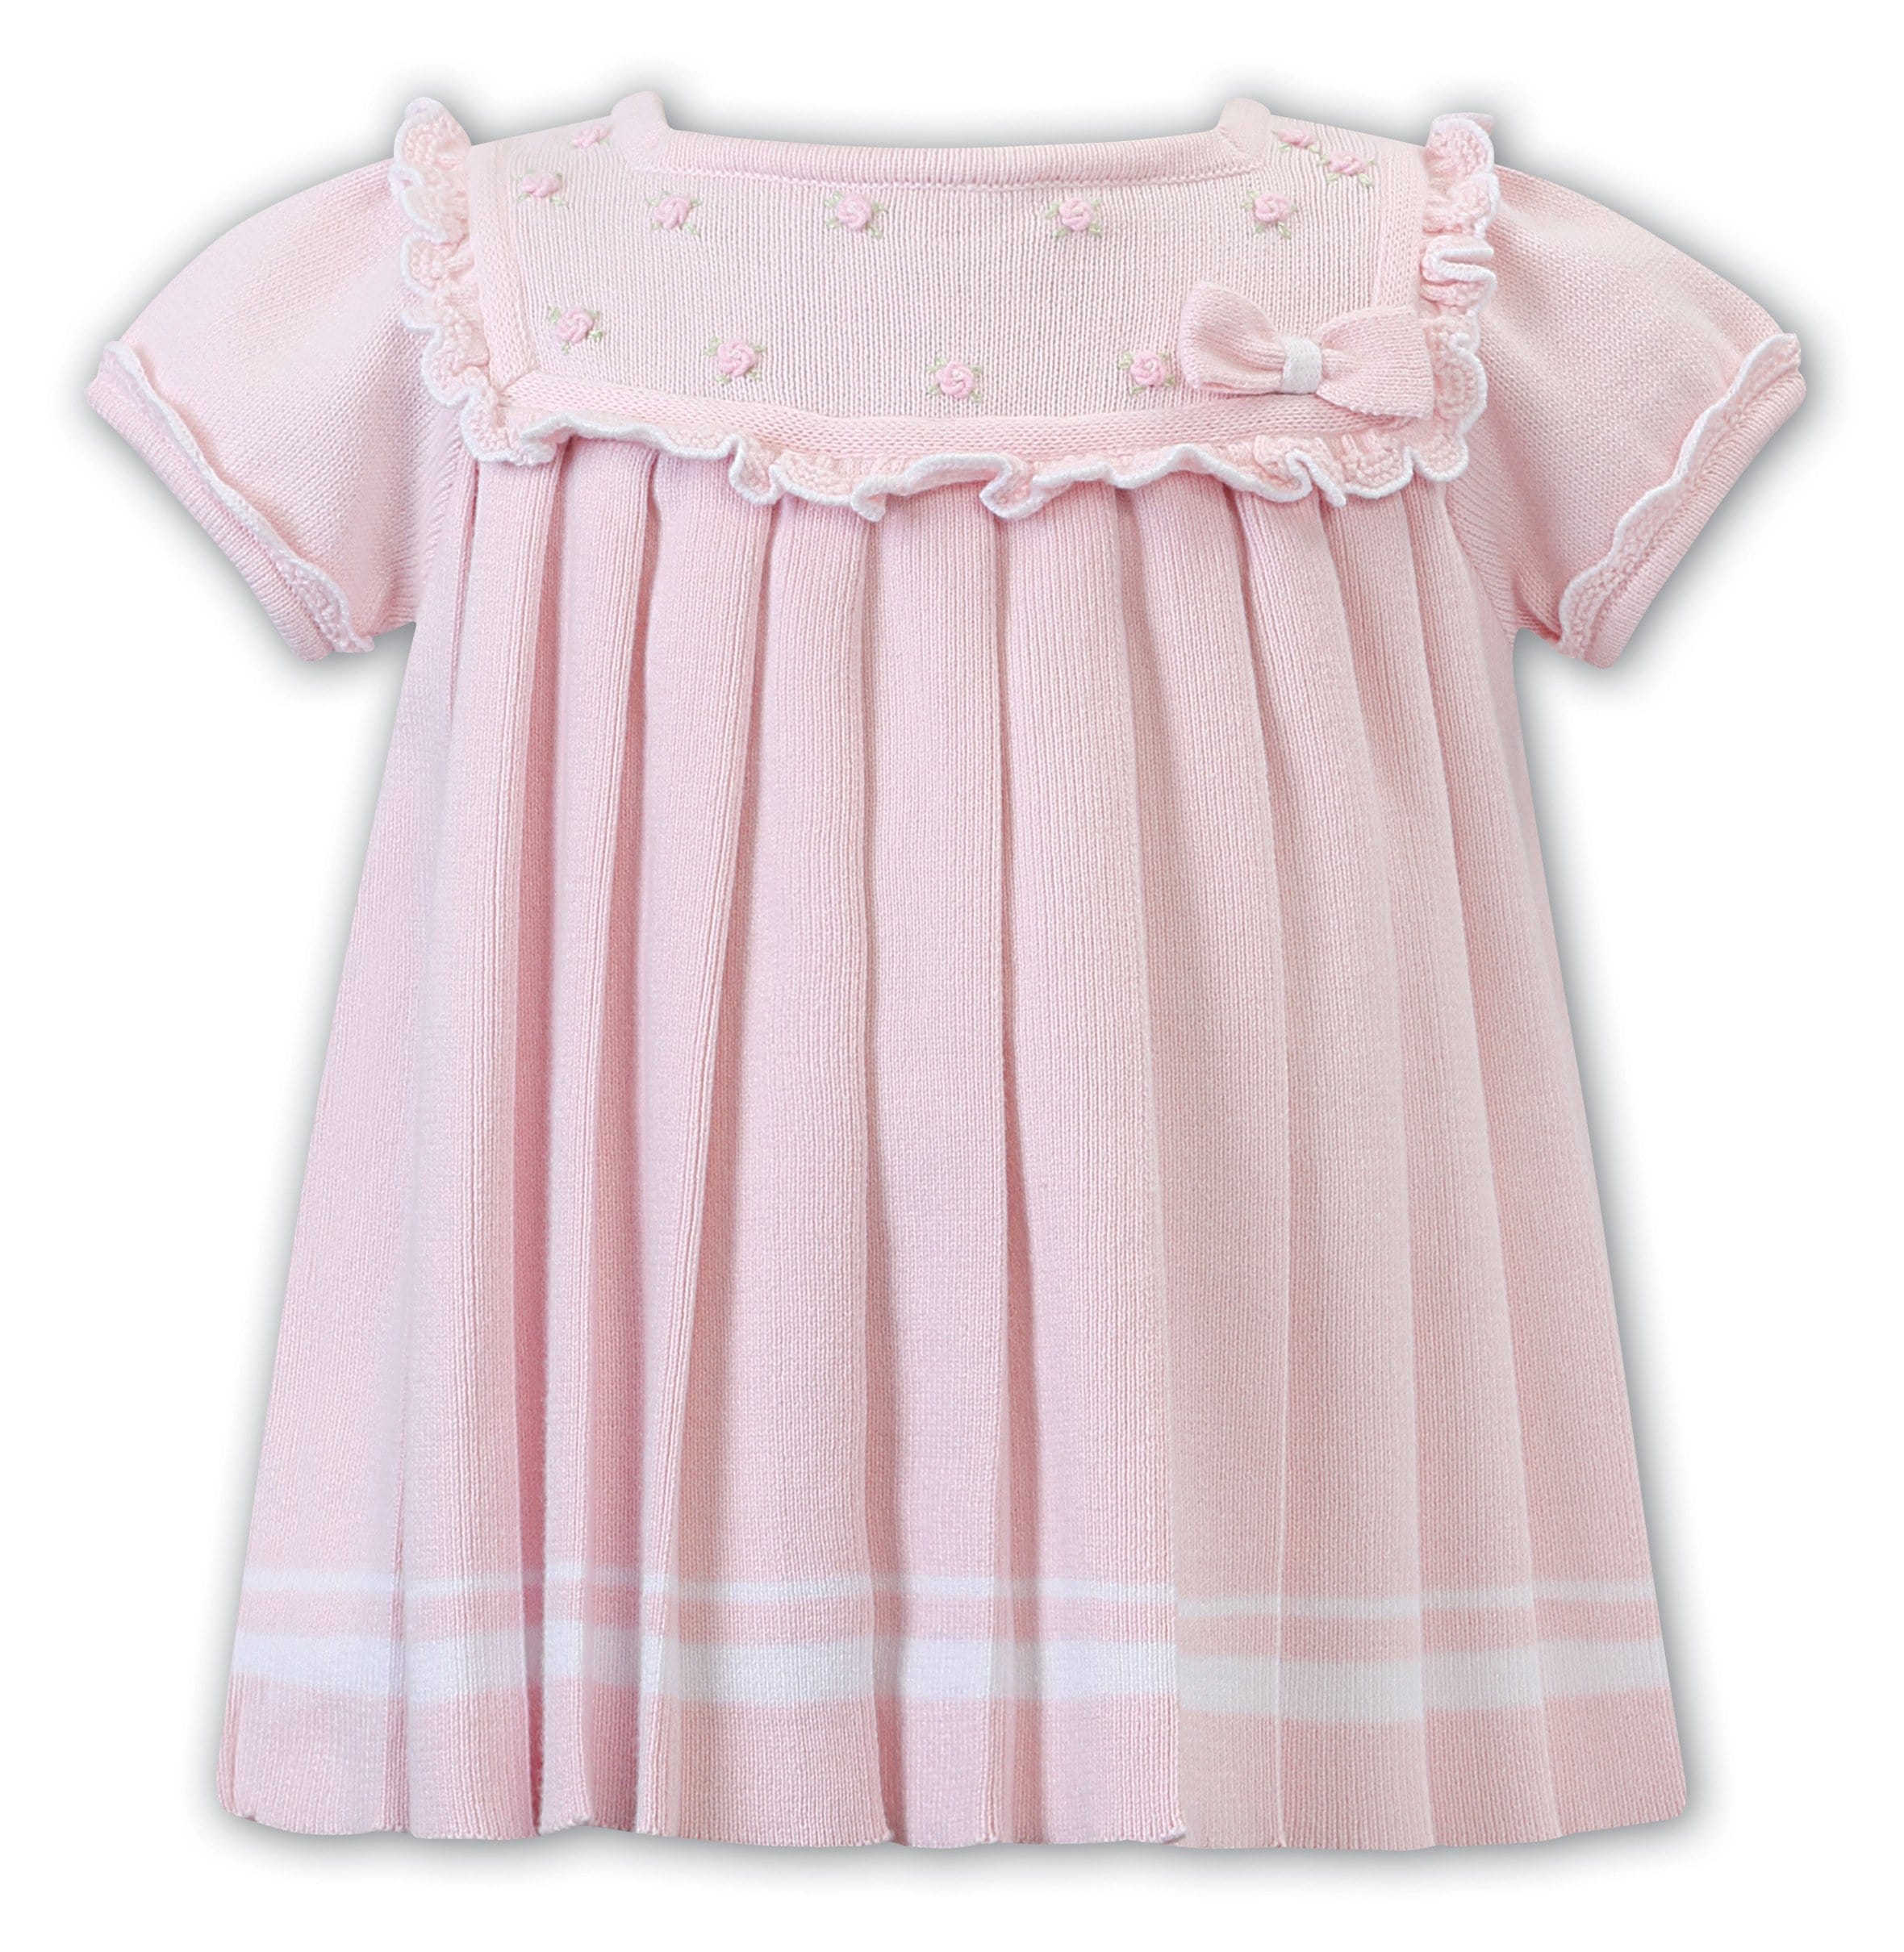 SARAH LOUISE - Cotton Pleated Dress - Pink